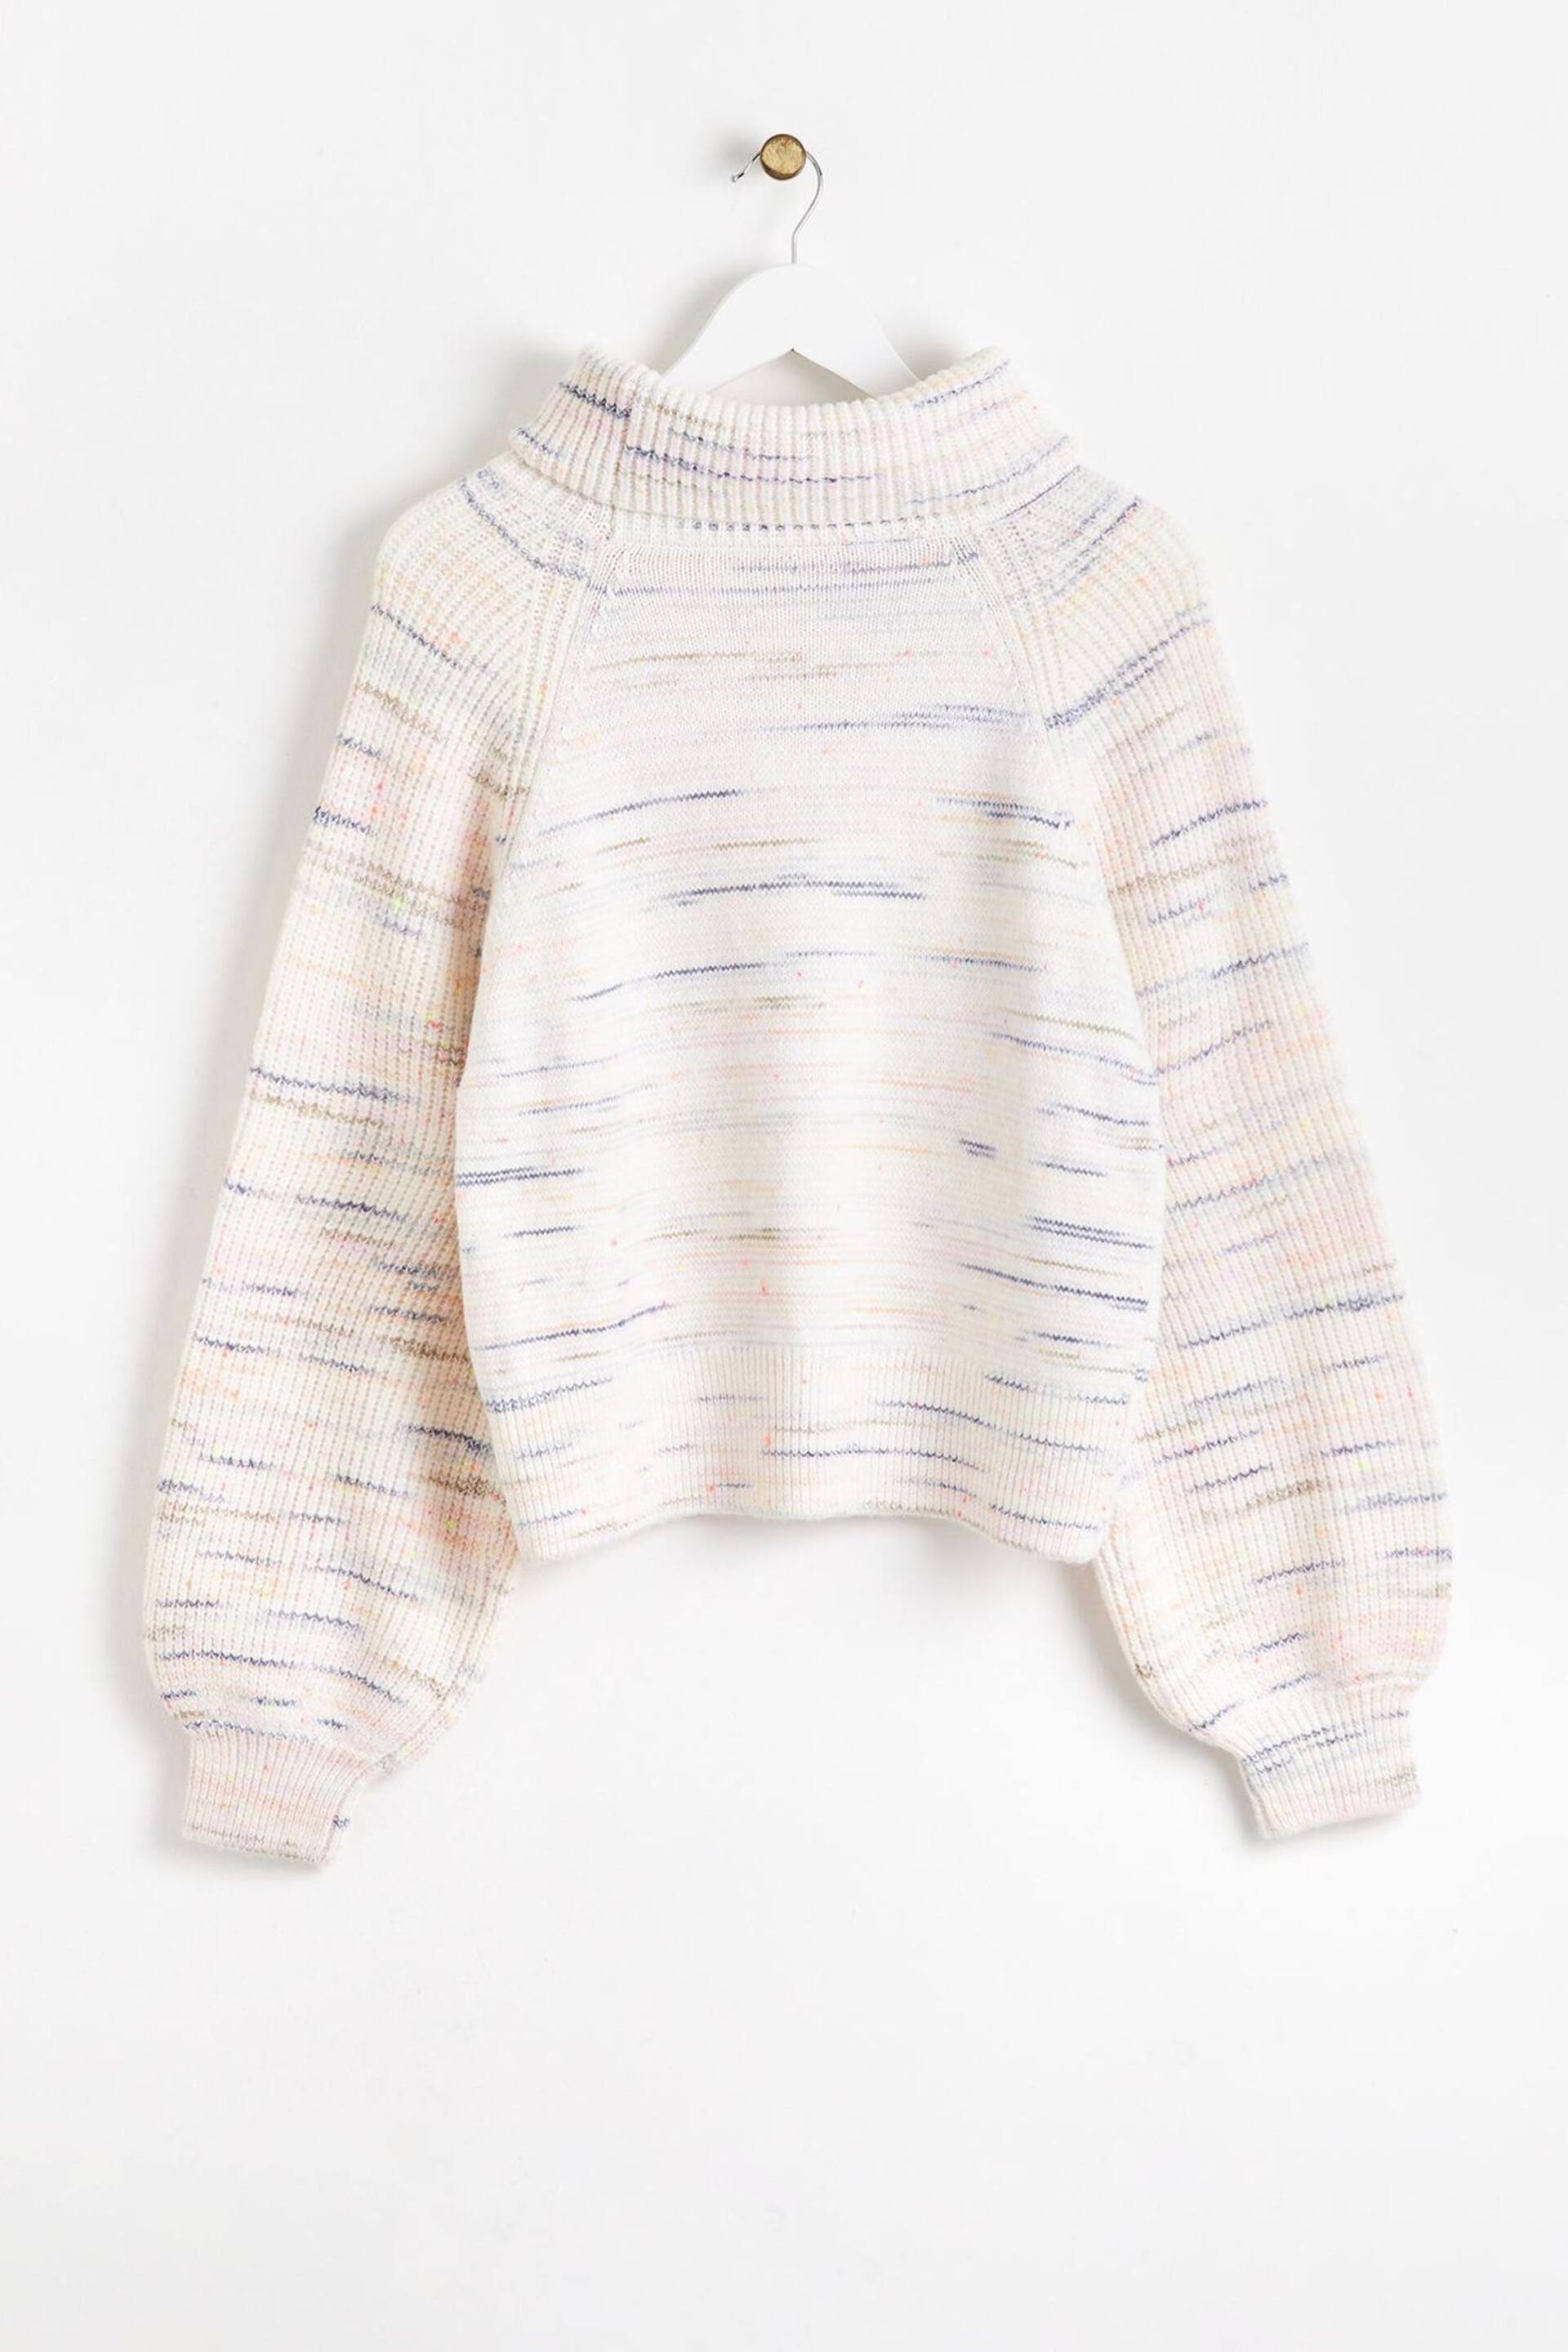 Oliver Bonas Nepped Roll Neck Knitted Cream Jumper - Image 5 of 8